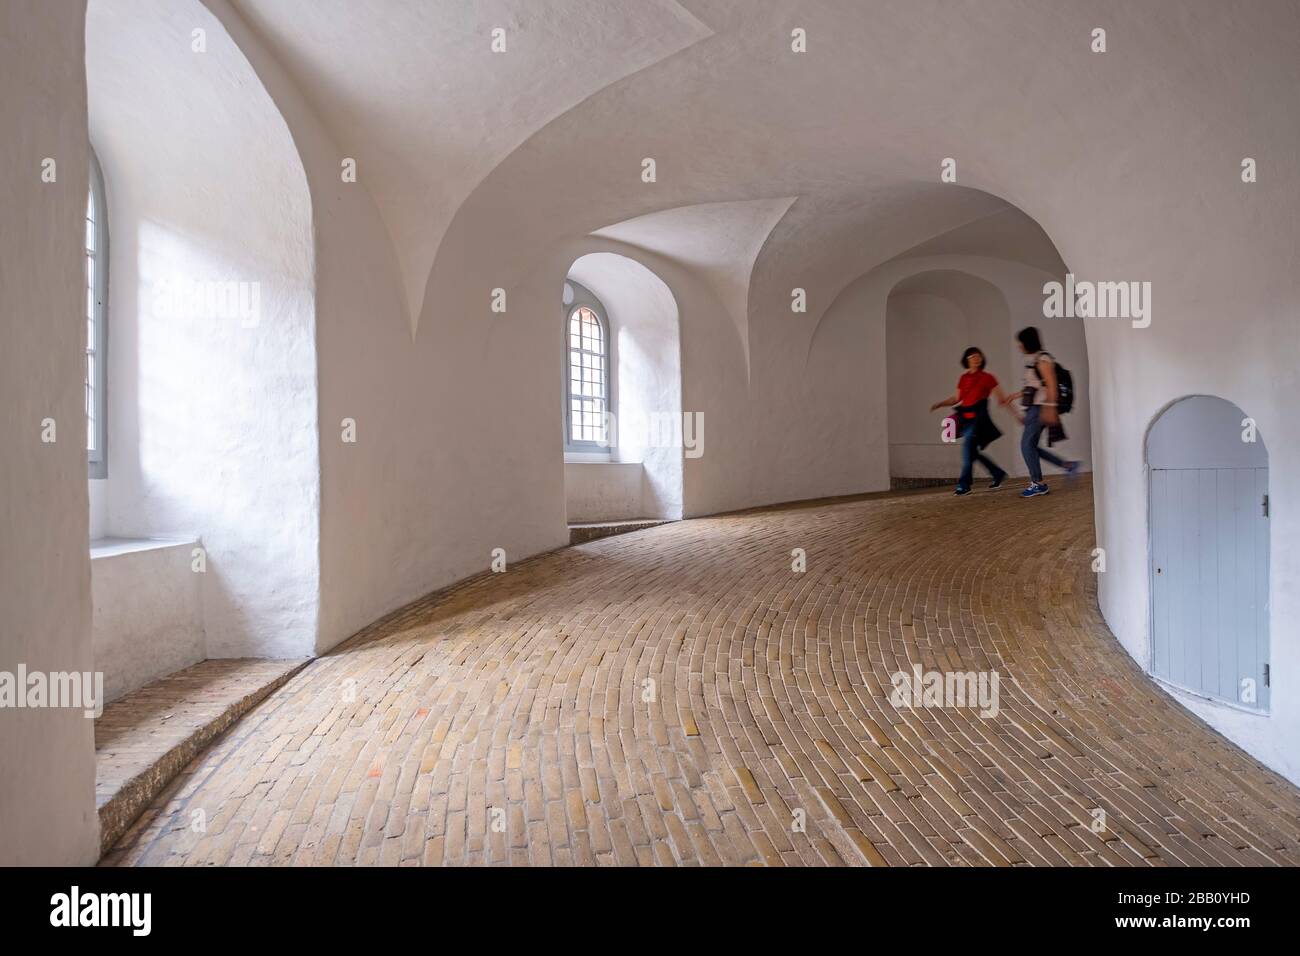 Two tourists descending the equestrian staircase inside the Round Tower aka Rundetaarn in Copenhagen, Denmark, Europe Stock Photo